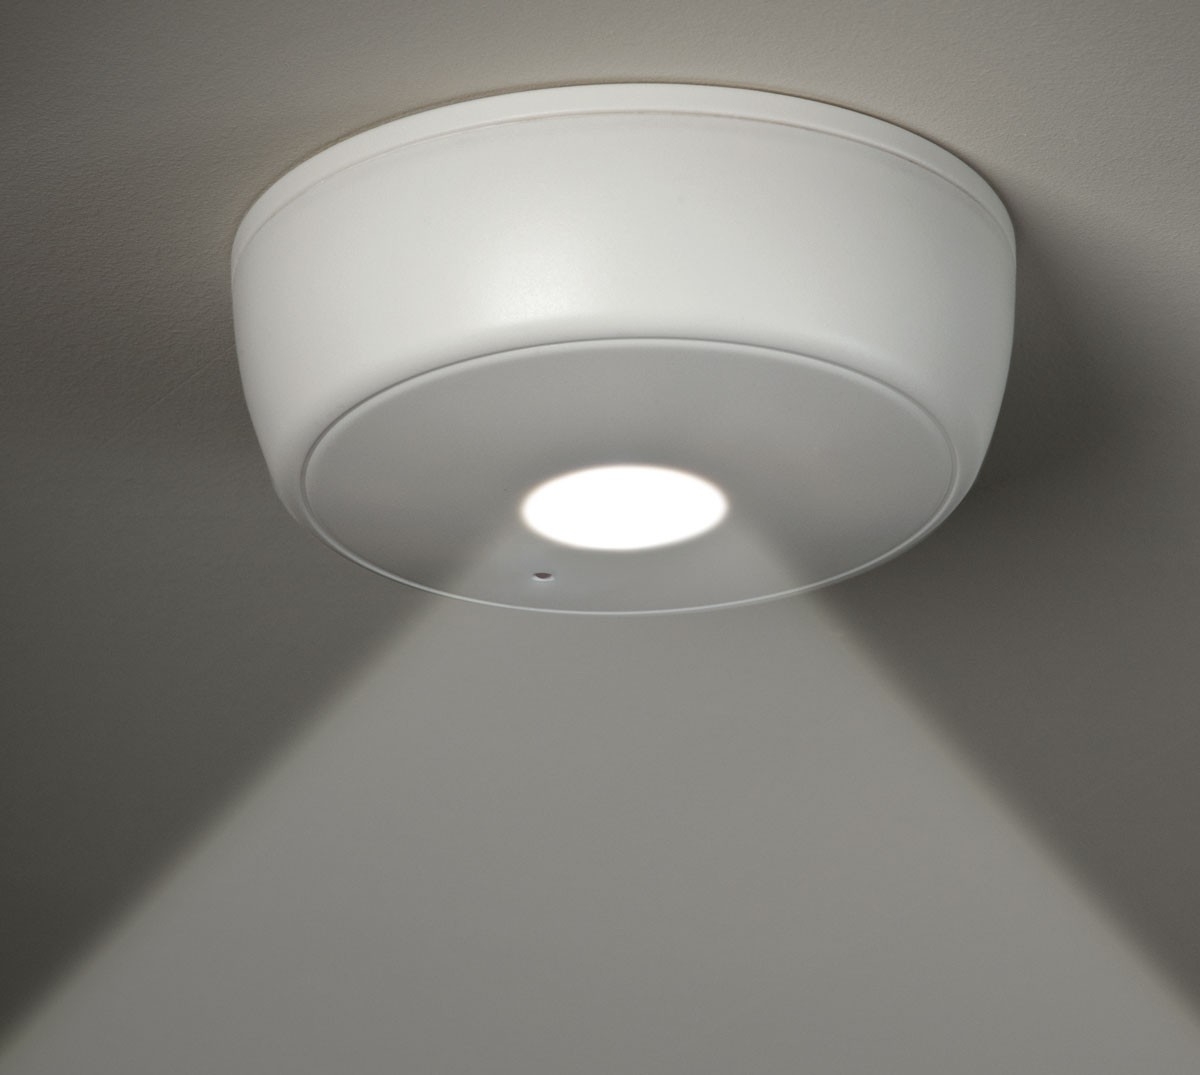 Permalink to Wireless Ceiling Light Fixture